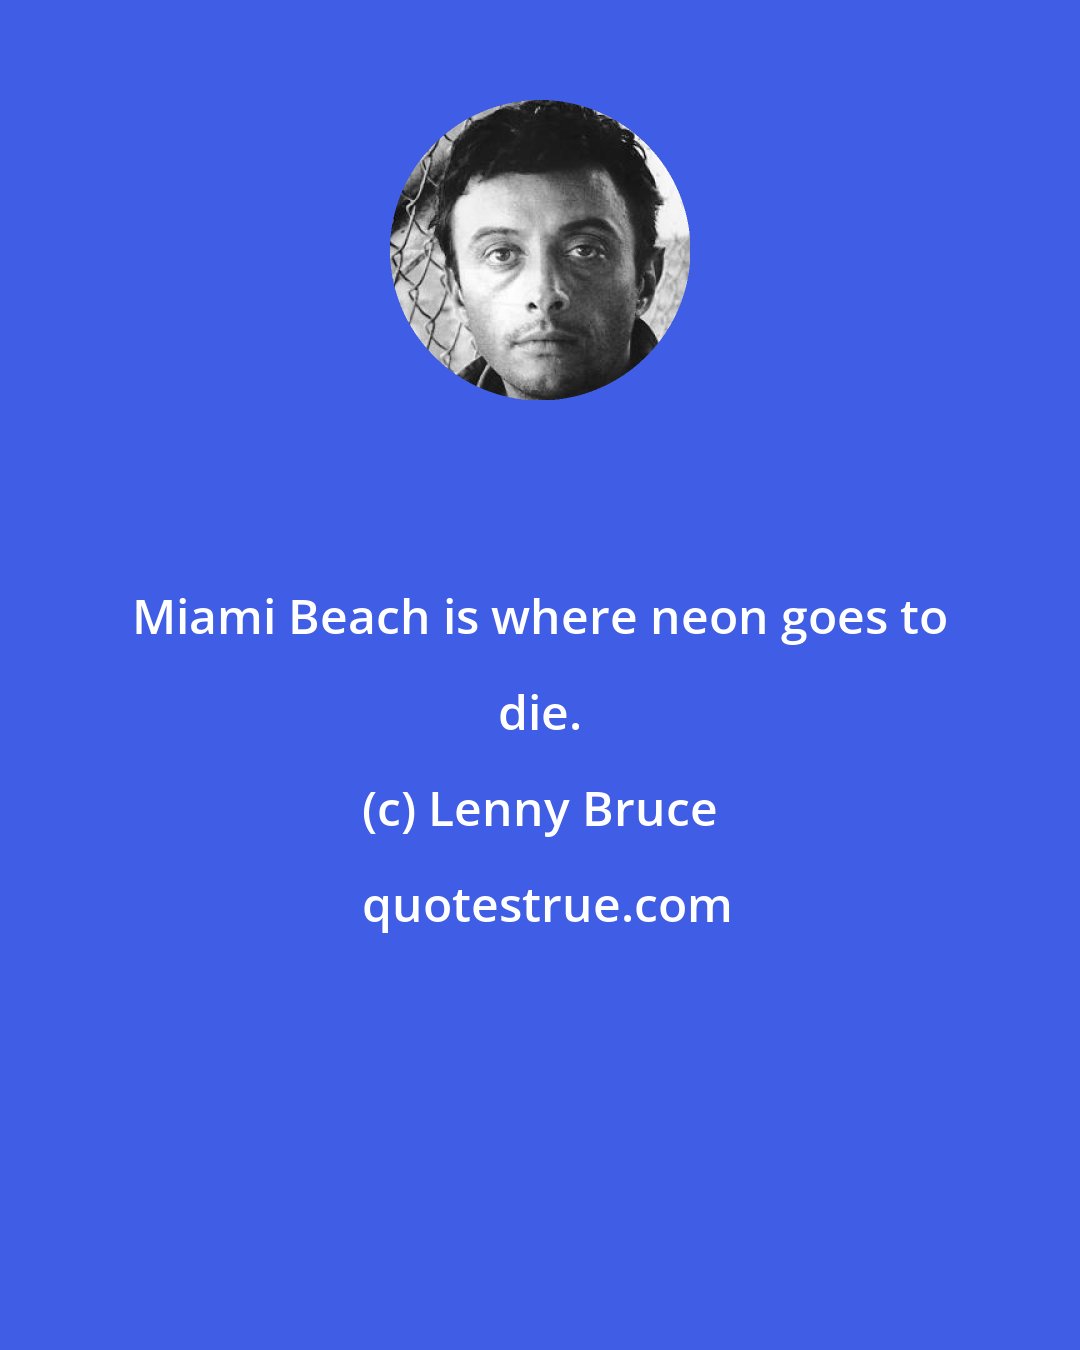 Lenny Bruce: Miami Beach is where neon goes to die.